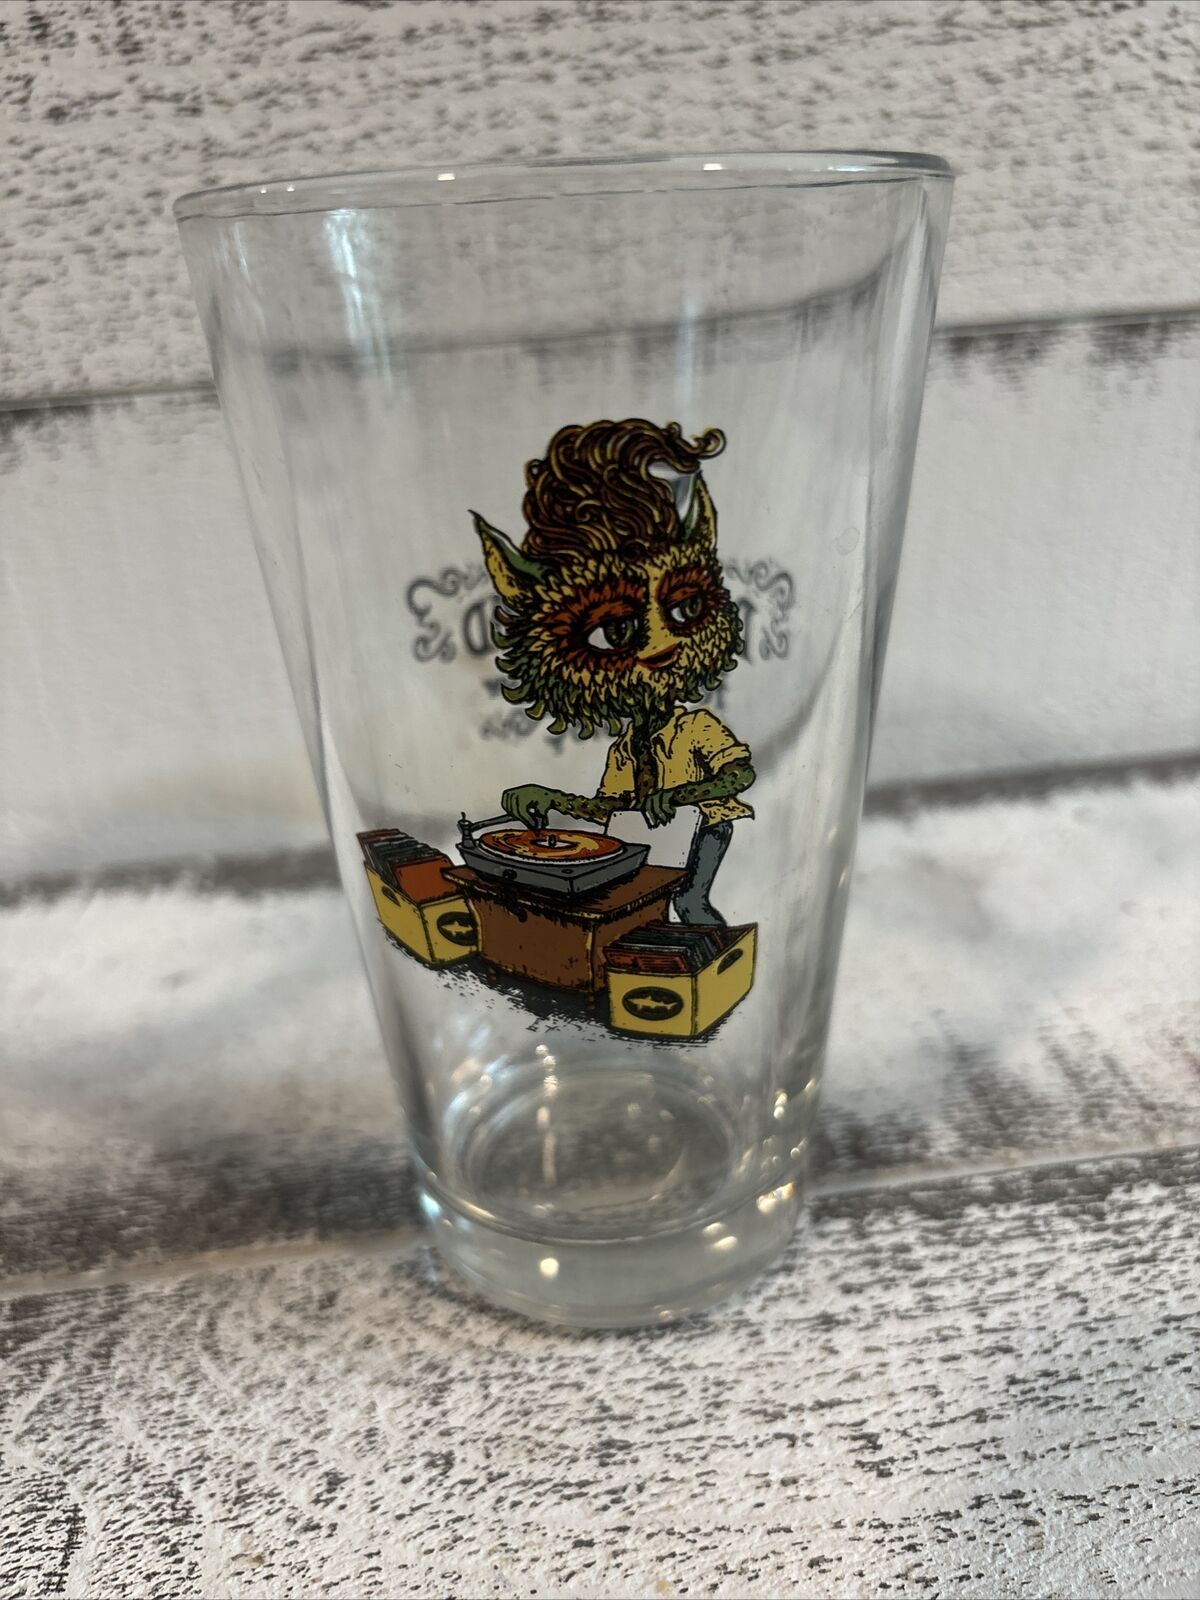 Dogfish Head Brewery Record Store Day 2018 Pint Beer Glass IPA Craft